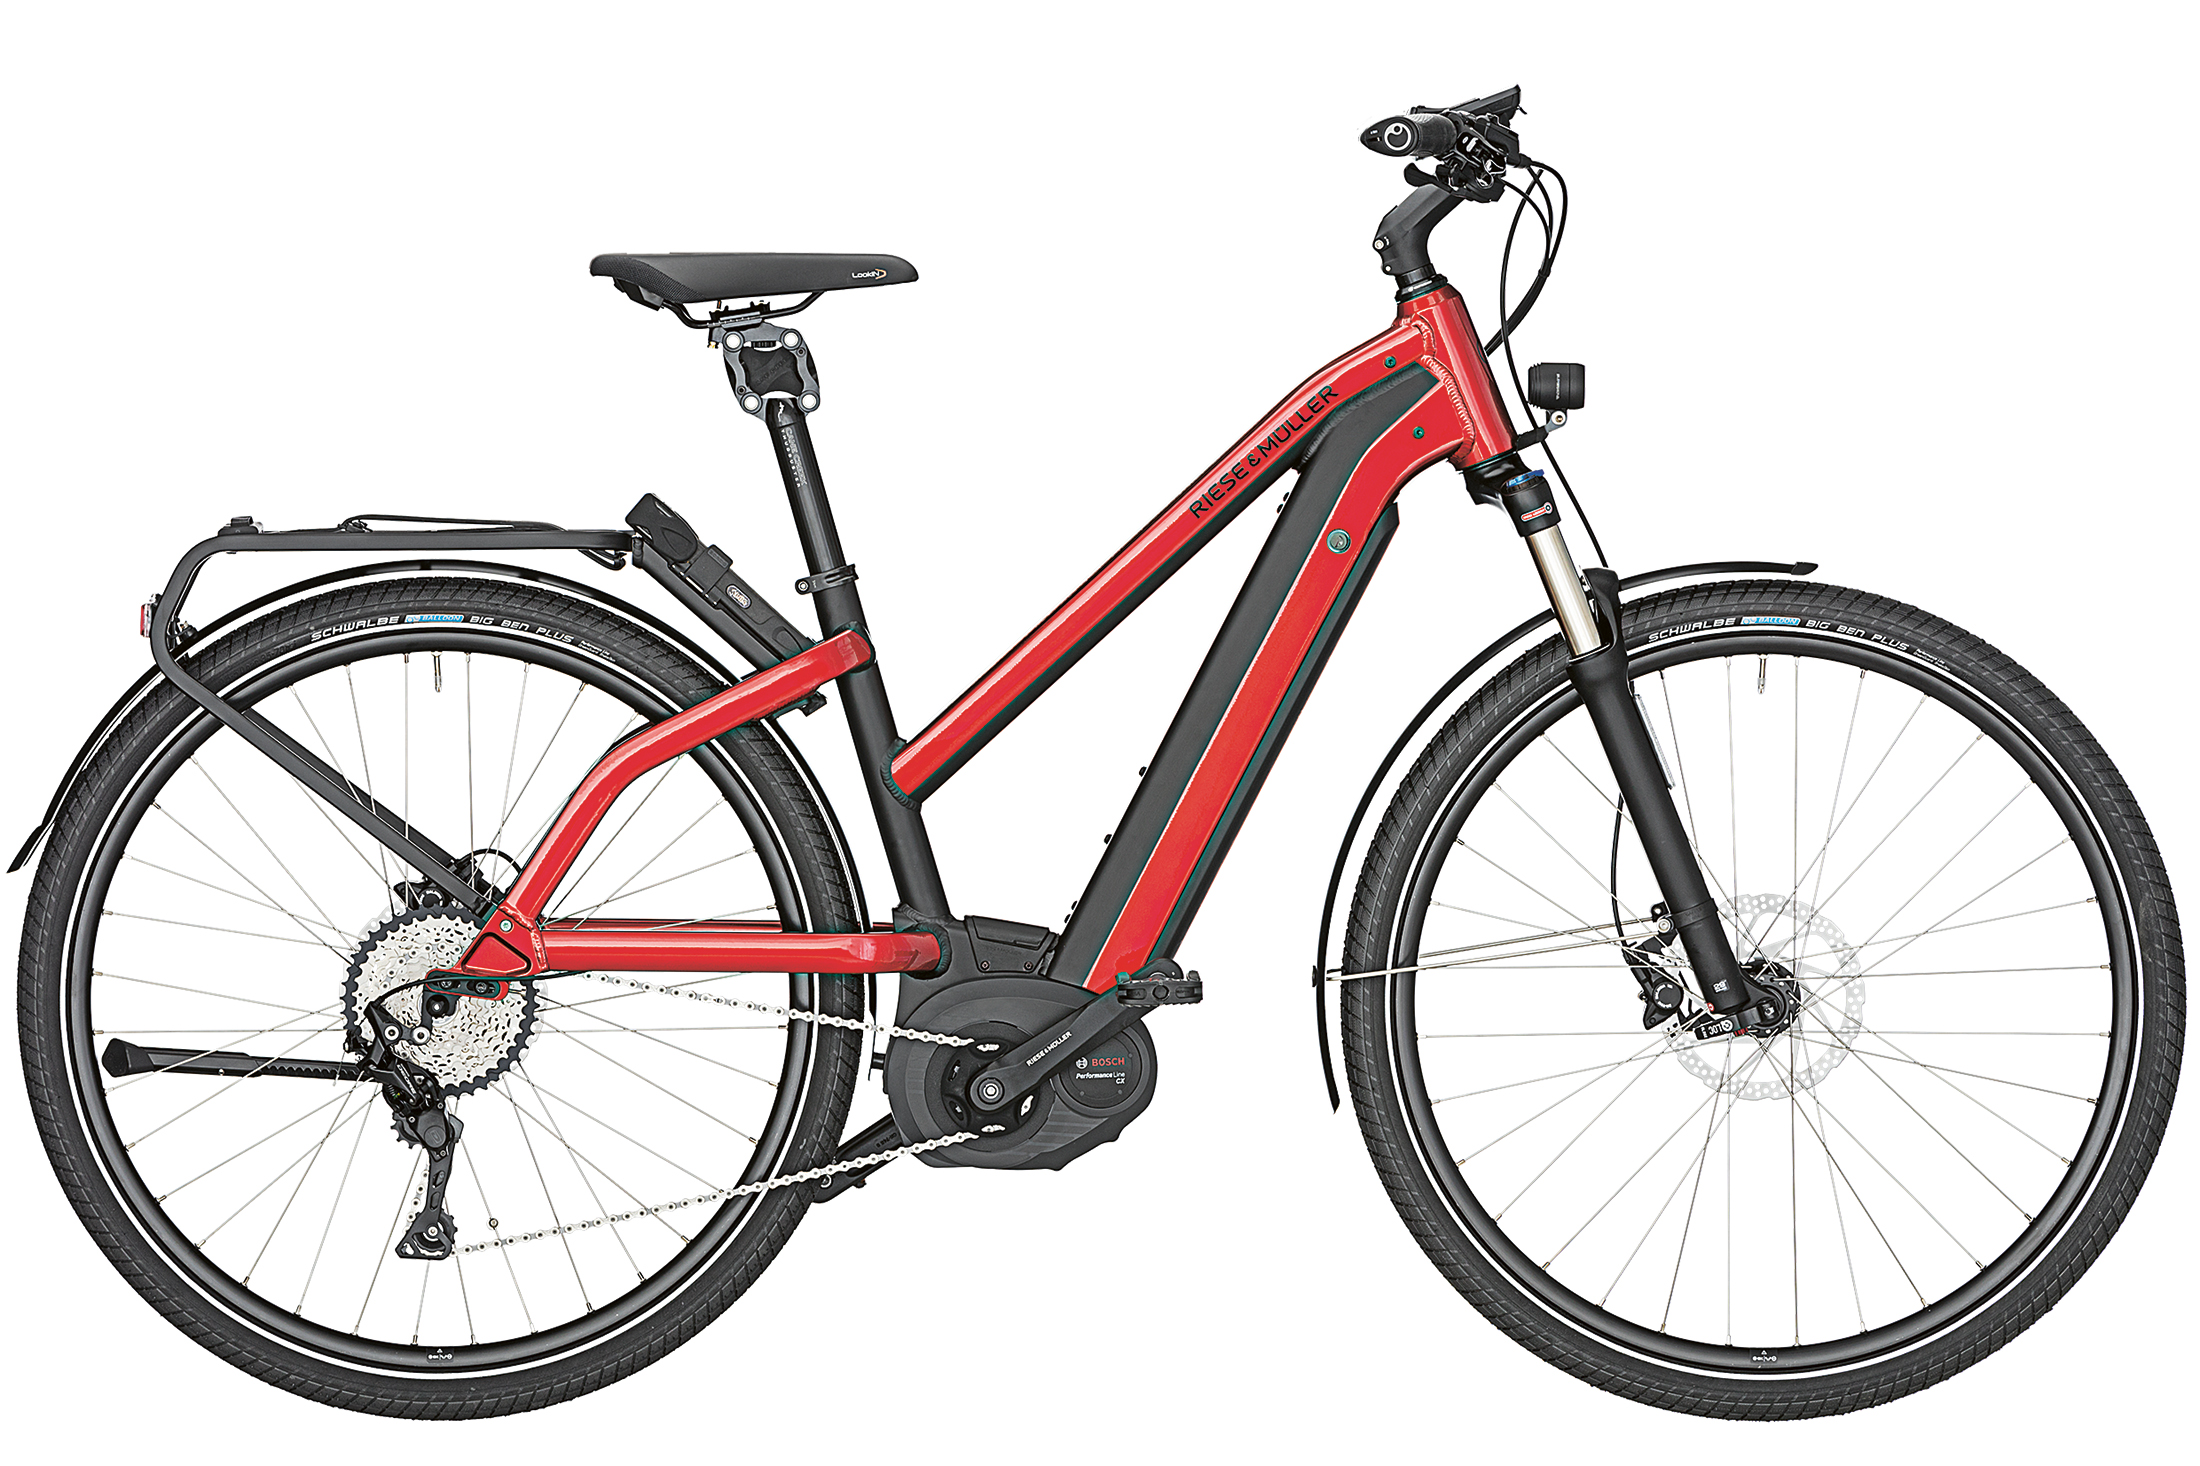 18_New-Charger_touring_Mixte_electric-red-metallic.jpg